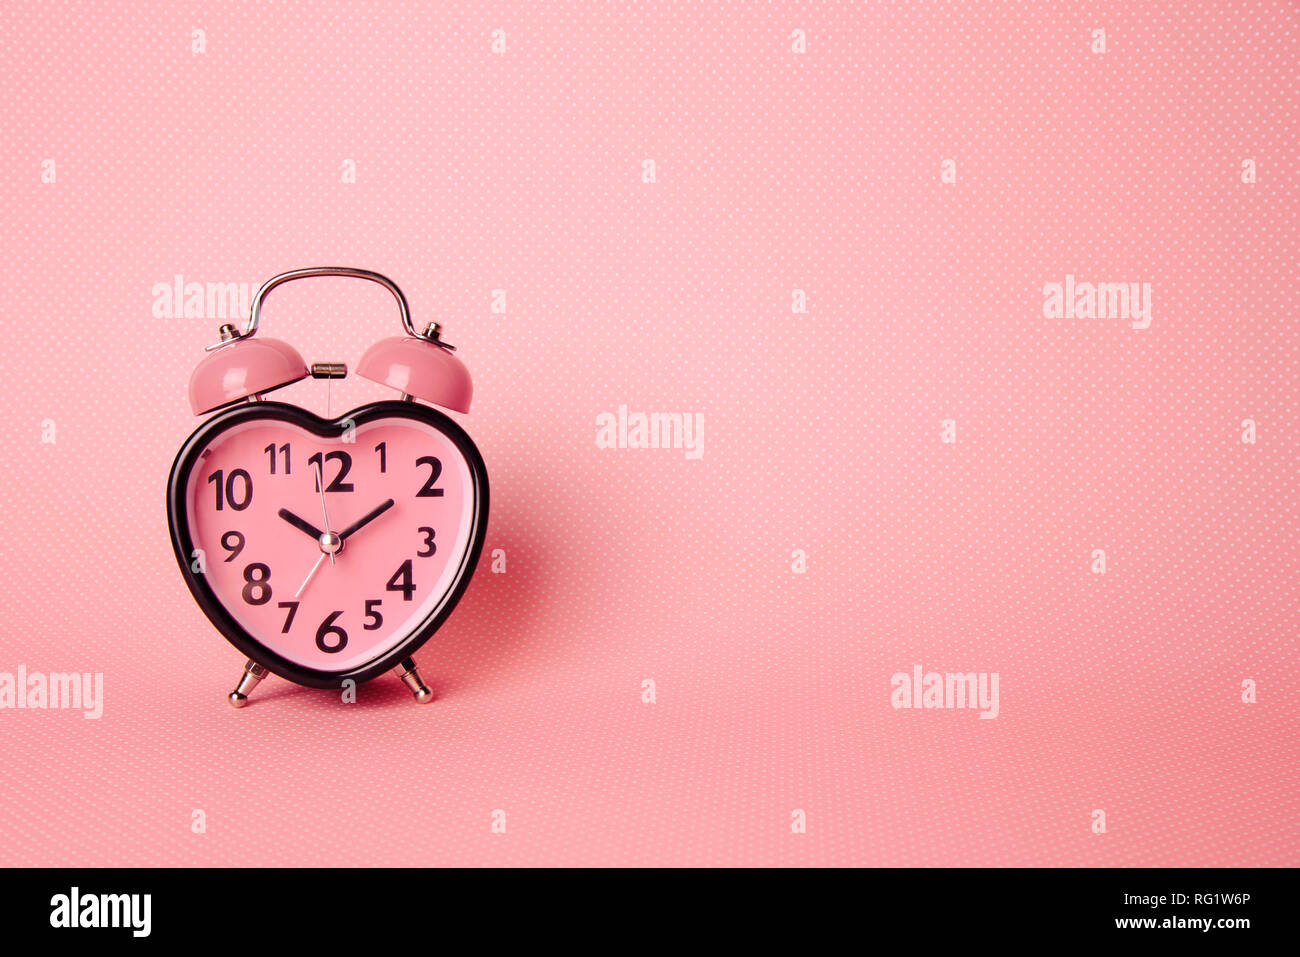 Heart shaped clock on pink background. Stock Photo